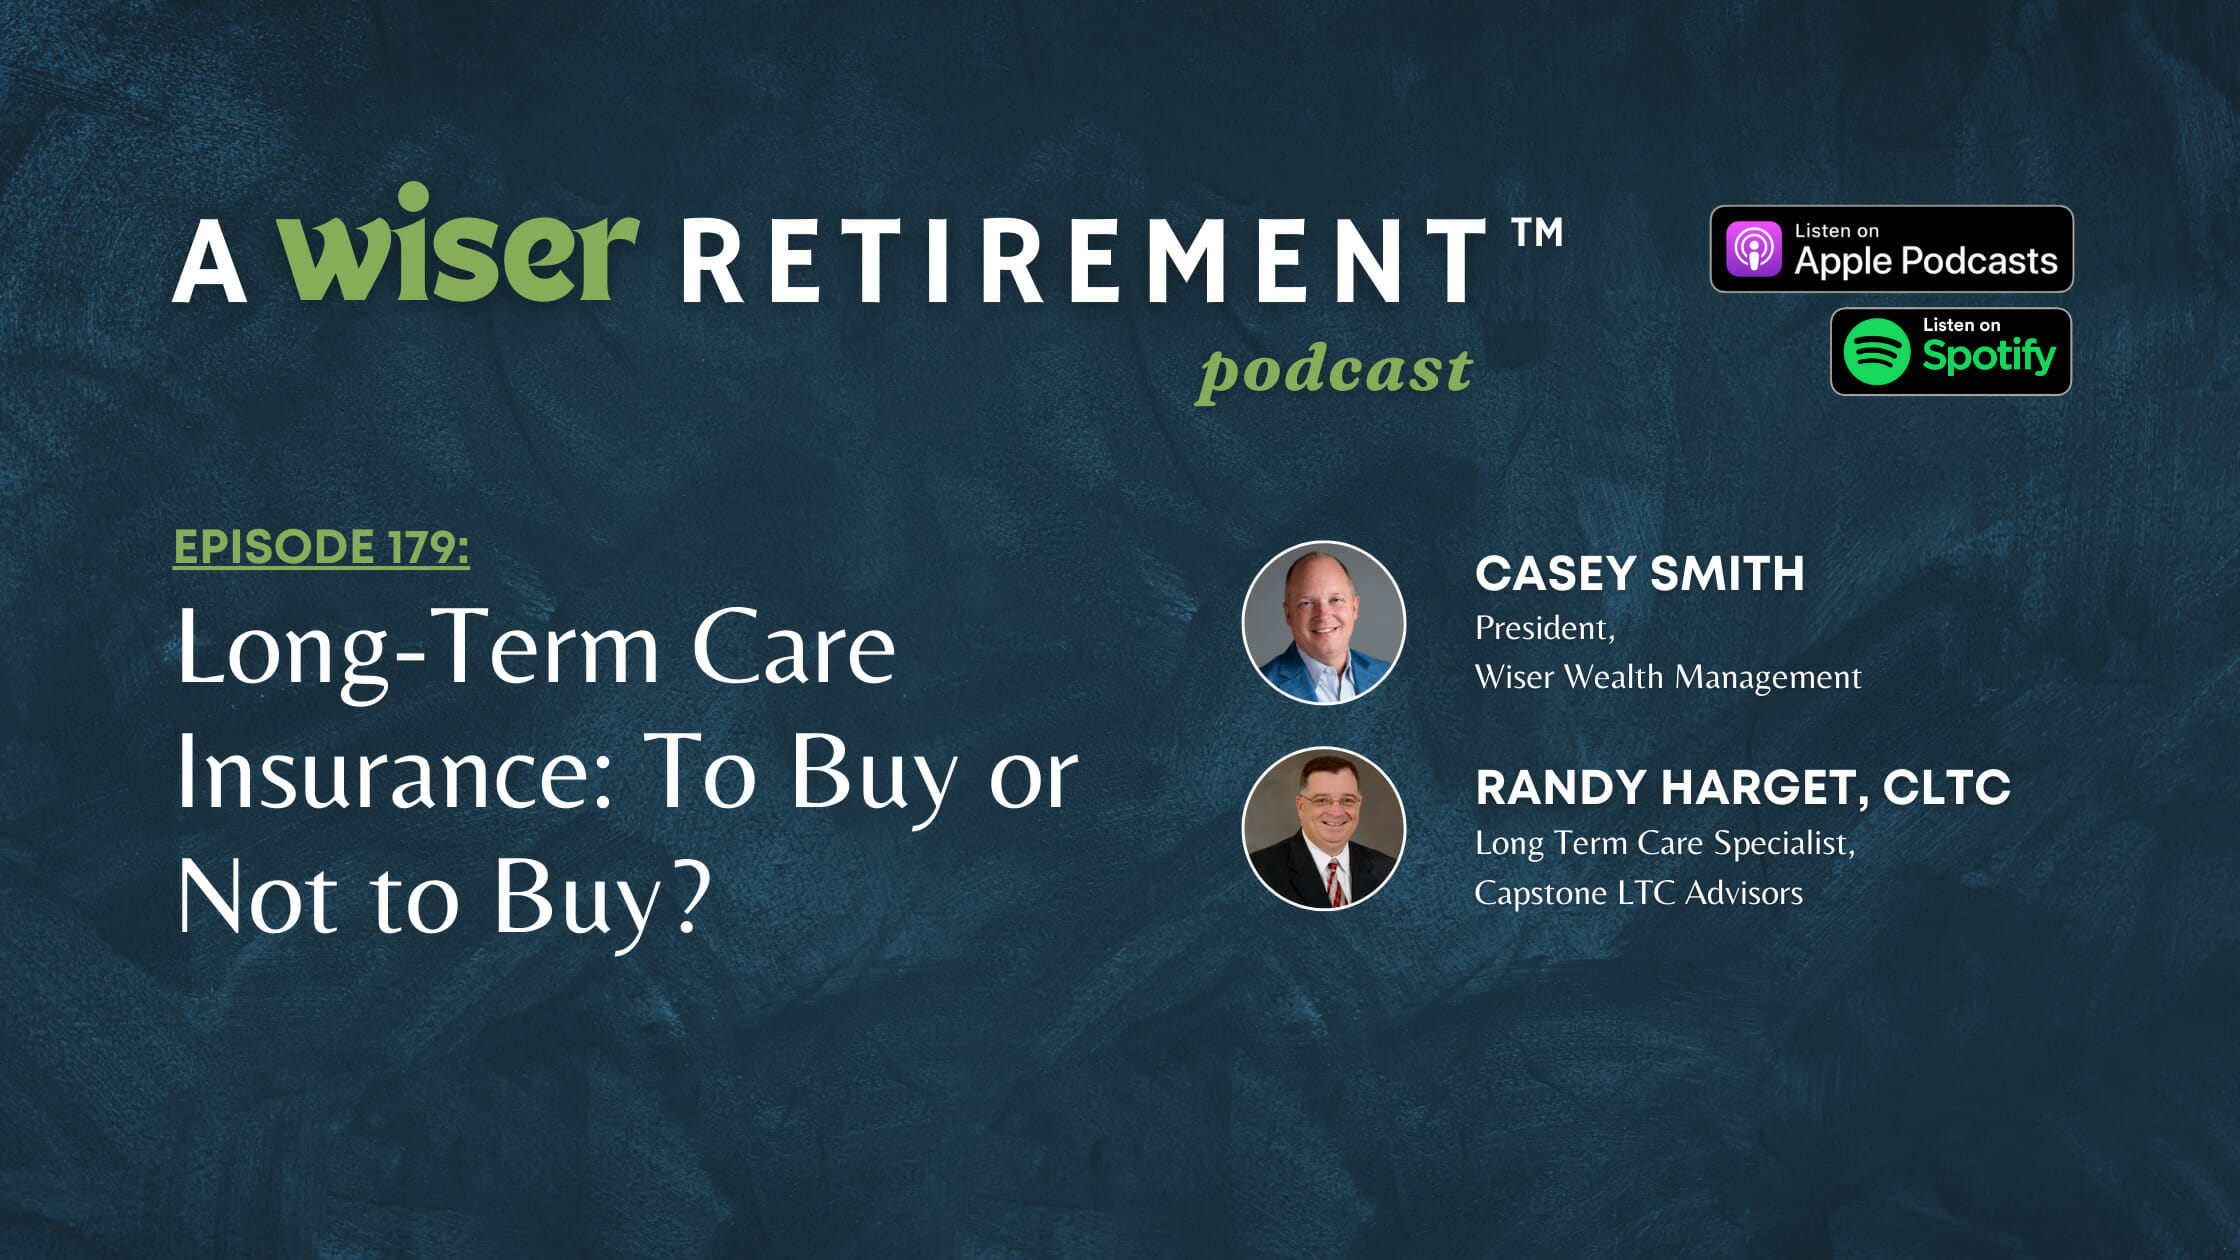 Long-Term Care Insurance: To Buy or Not to Buy?